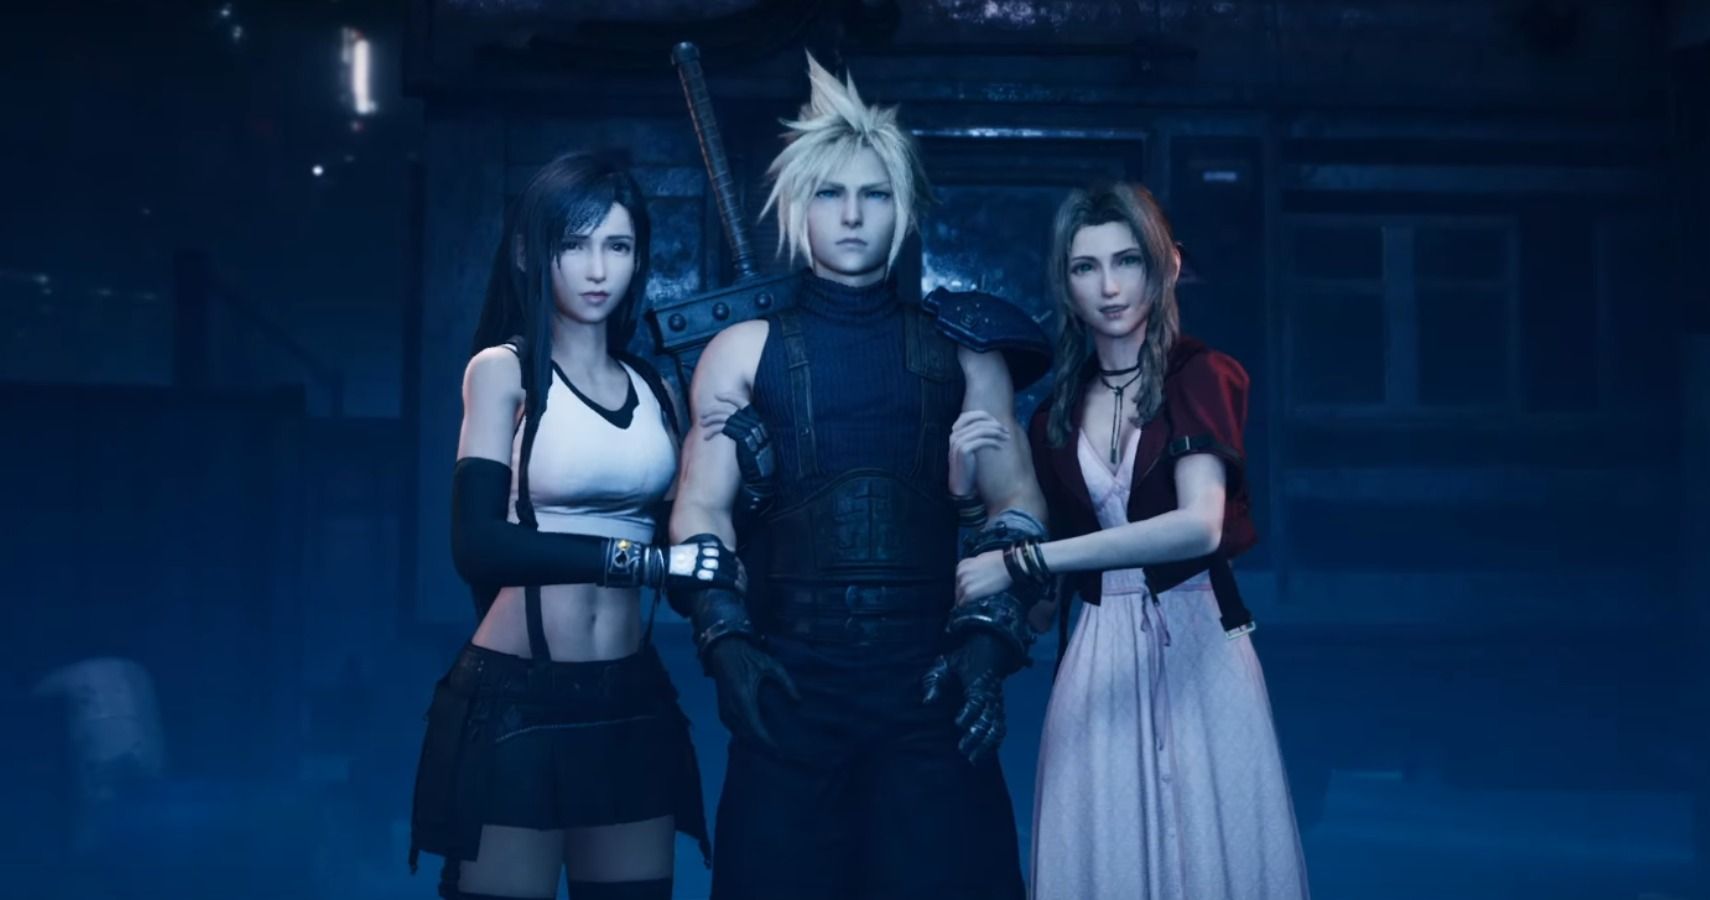 Final Fantasy VII Remake Cast Discusses Giving Life To Iconic Characters